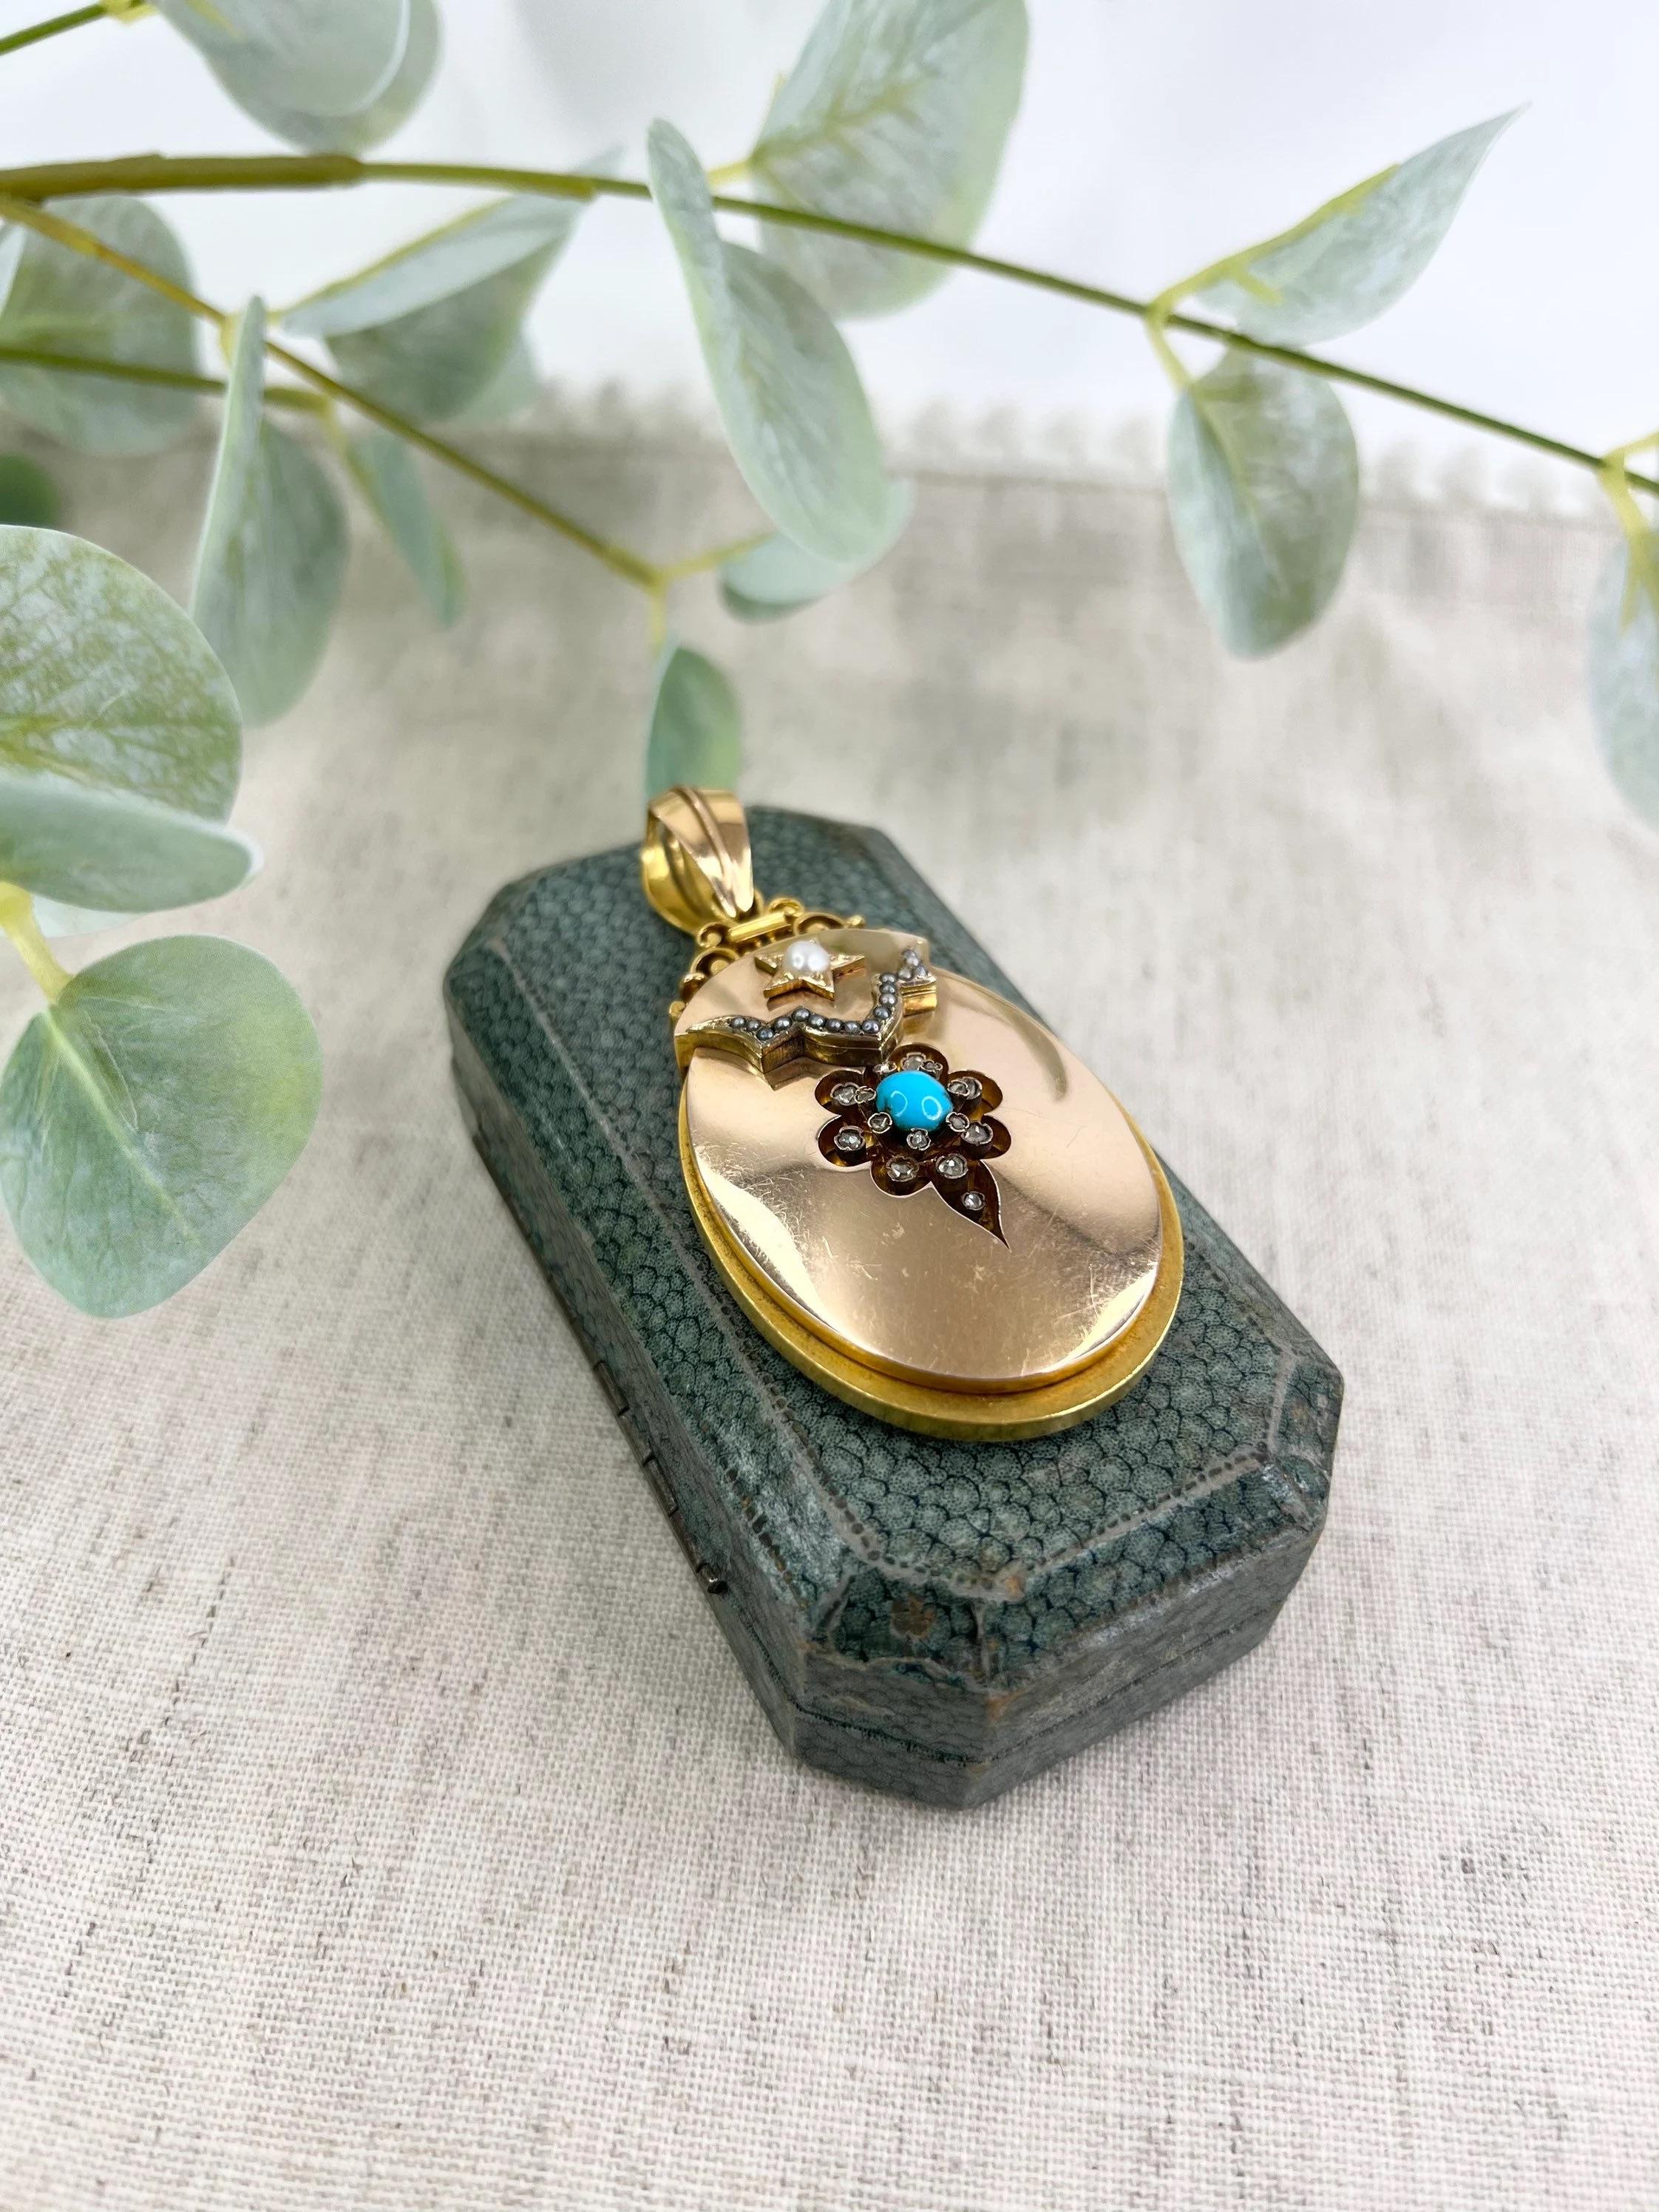 Antique Gold Locket 

18ct Gold Tested 

Victorian Circa 1870

The Most Fabulous, Victorian Oval Shaped Locket. Beautifully Handmade, Set with Natural Seed Pearls, Turquoise & Rose Cut Diamonds.
Features a Lovely, Substantial Bail & Glass Locket